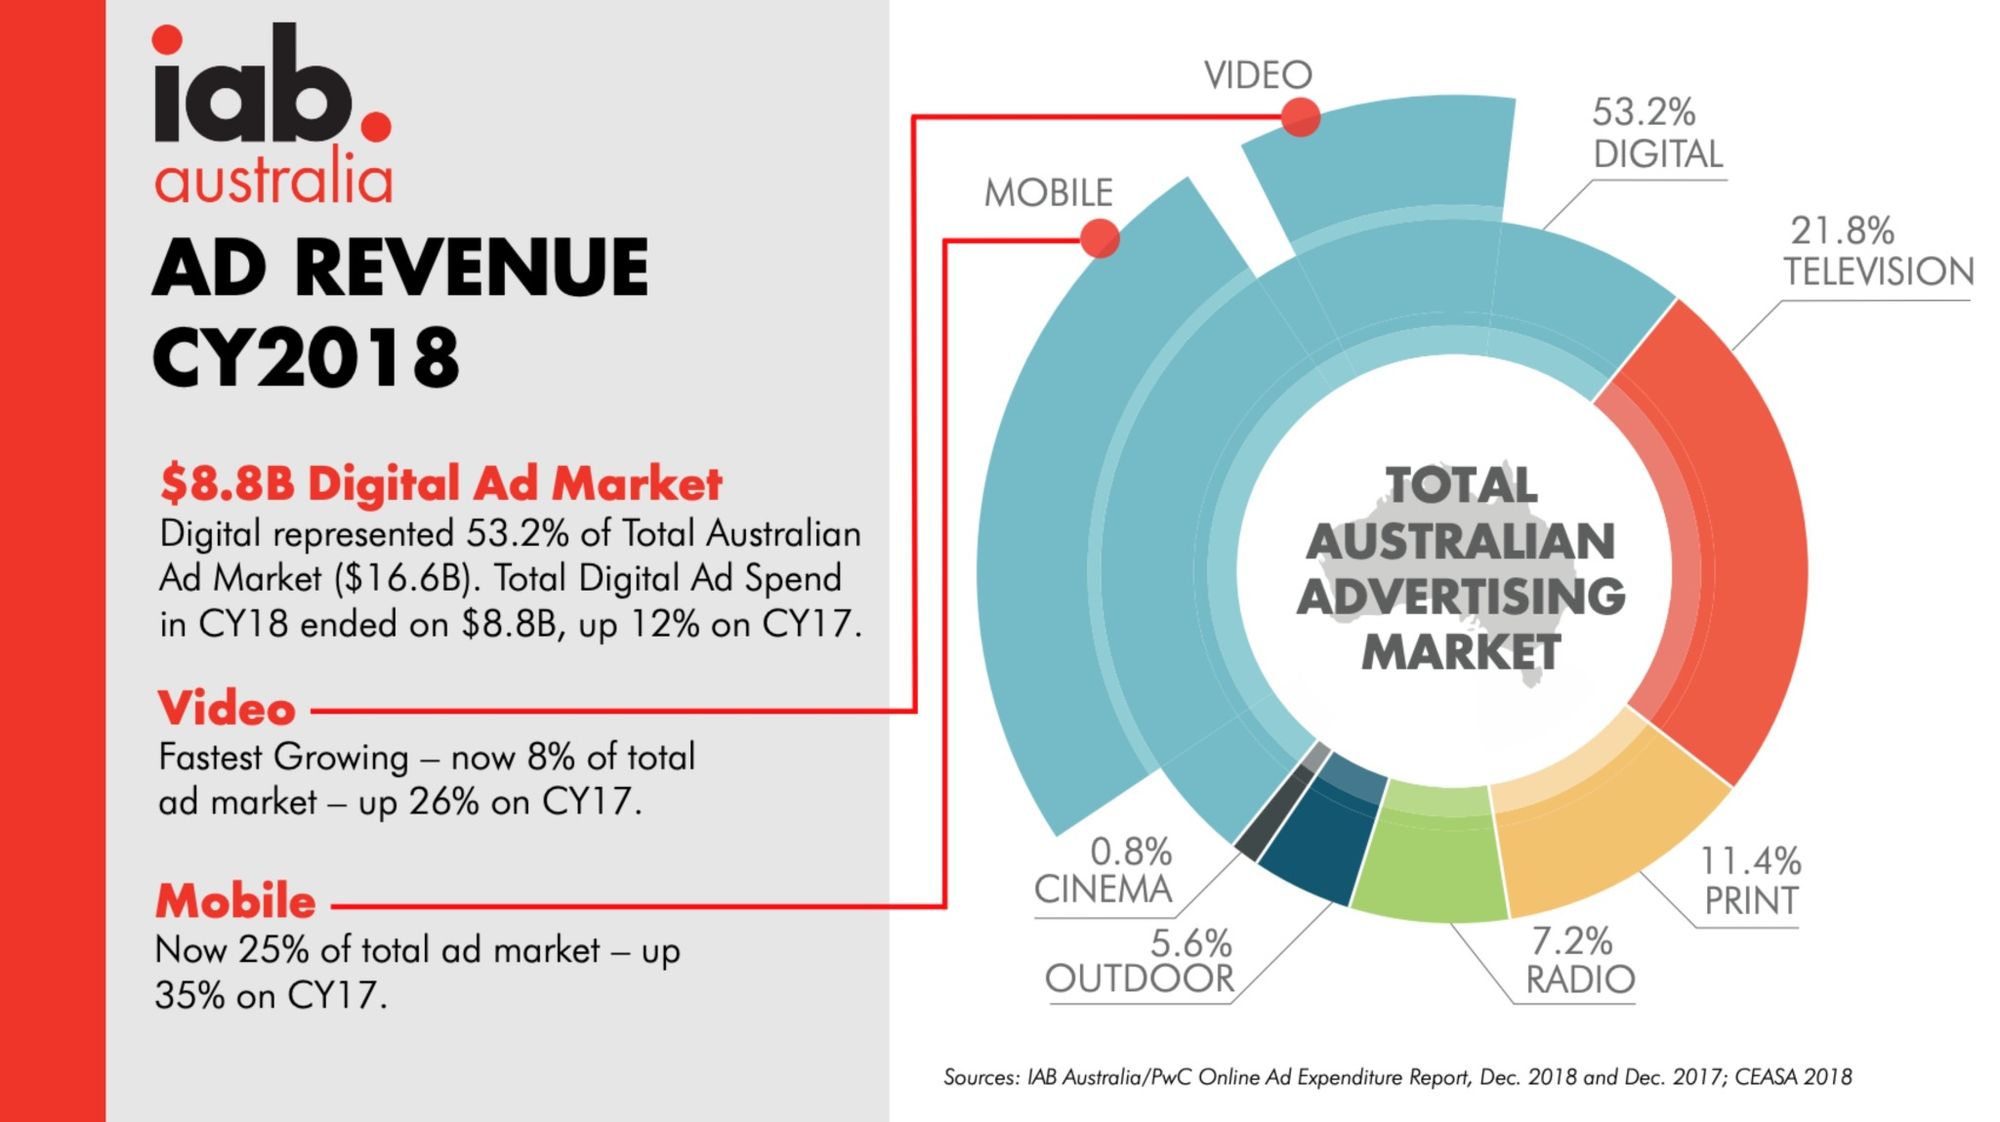 Digital reaches 53% of the total ad spend in Australia